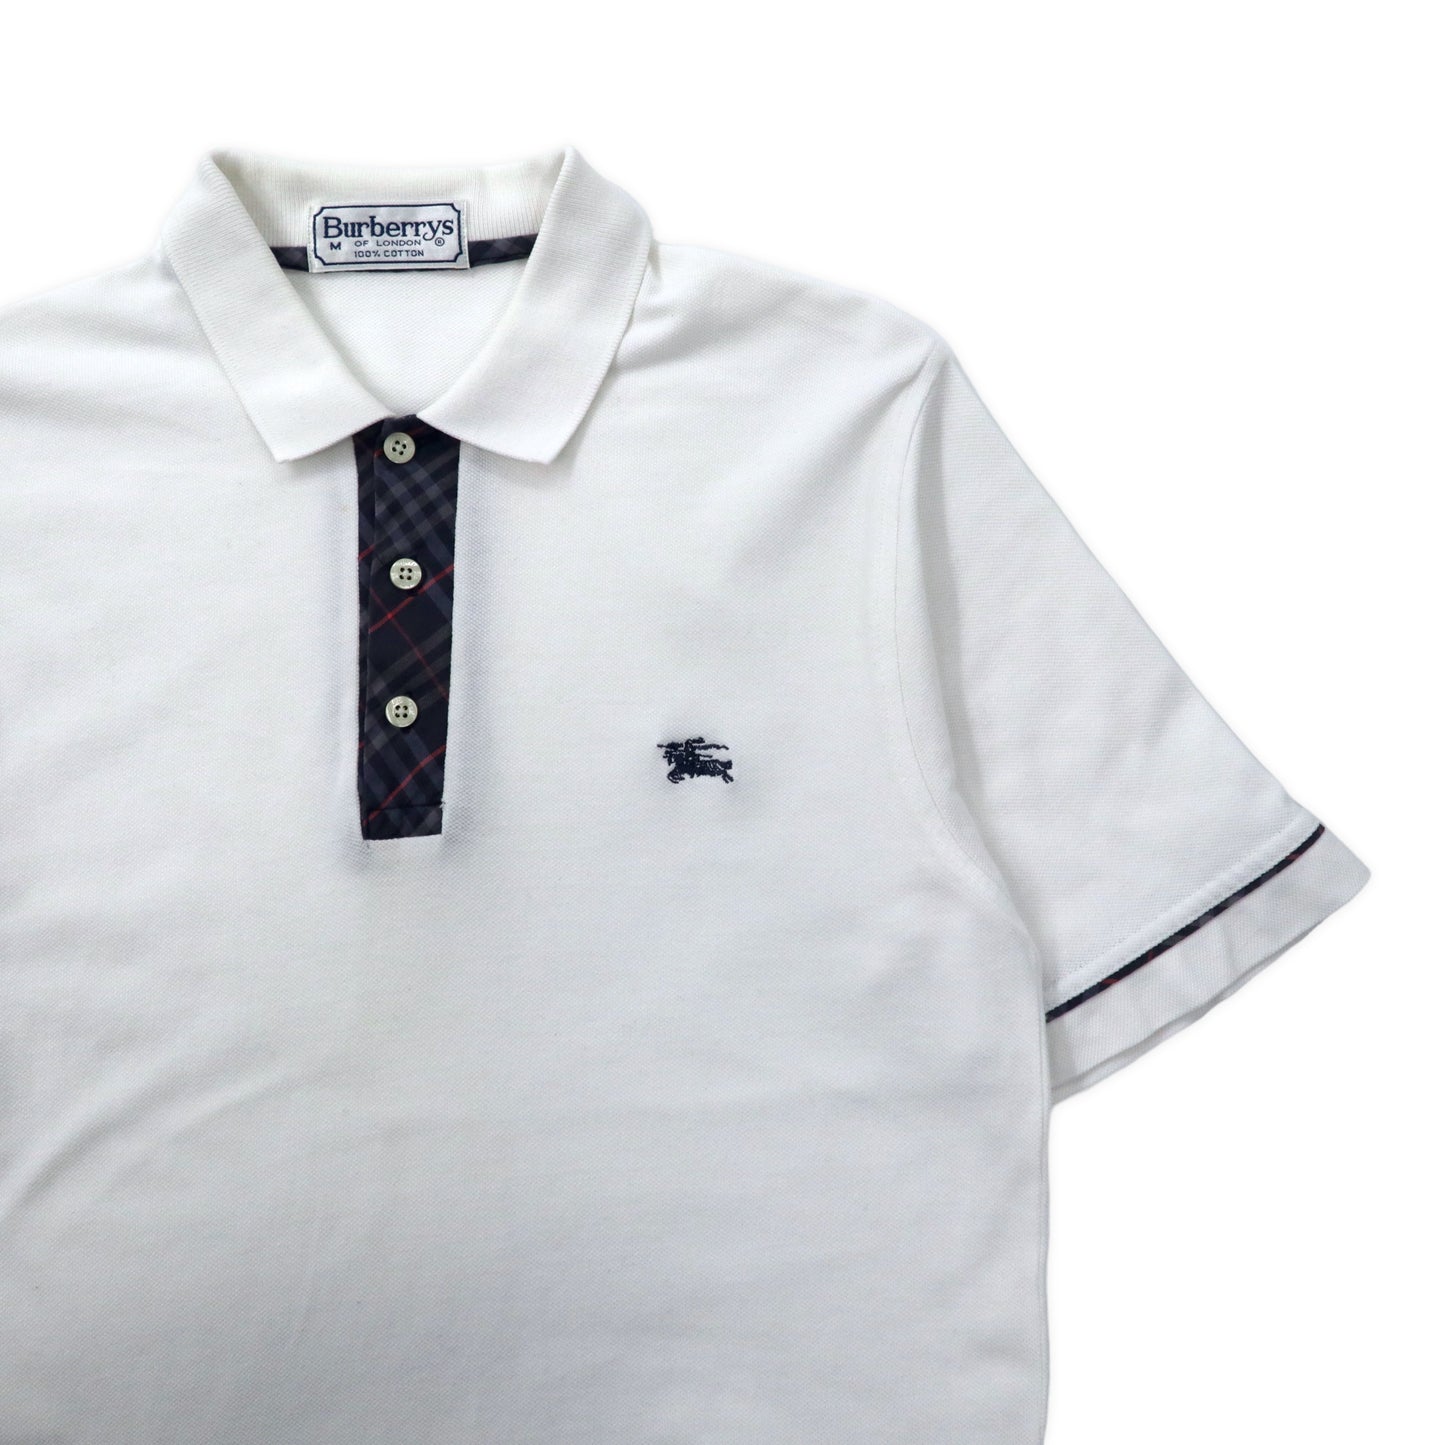 BURBERRYS Polo Shirt M White CHECKED Switch Cotton One Point